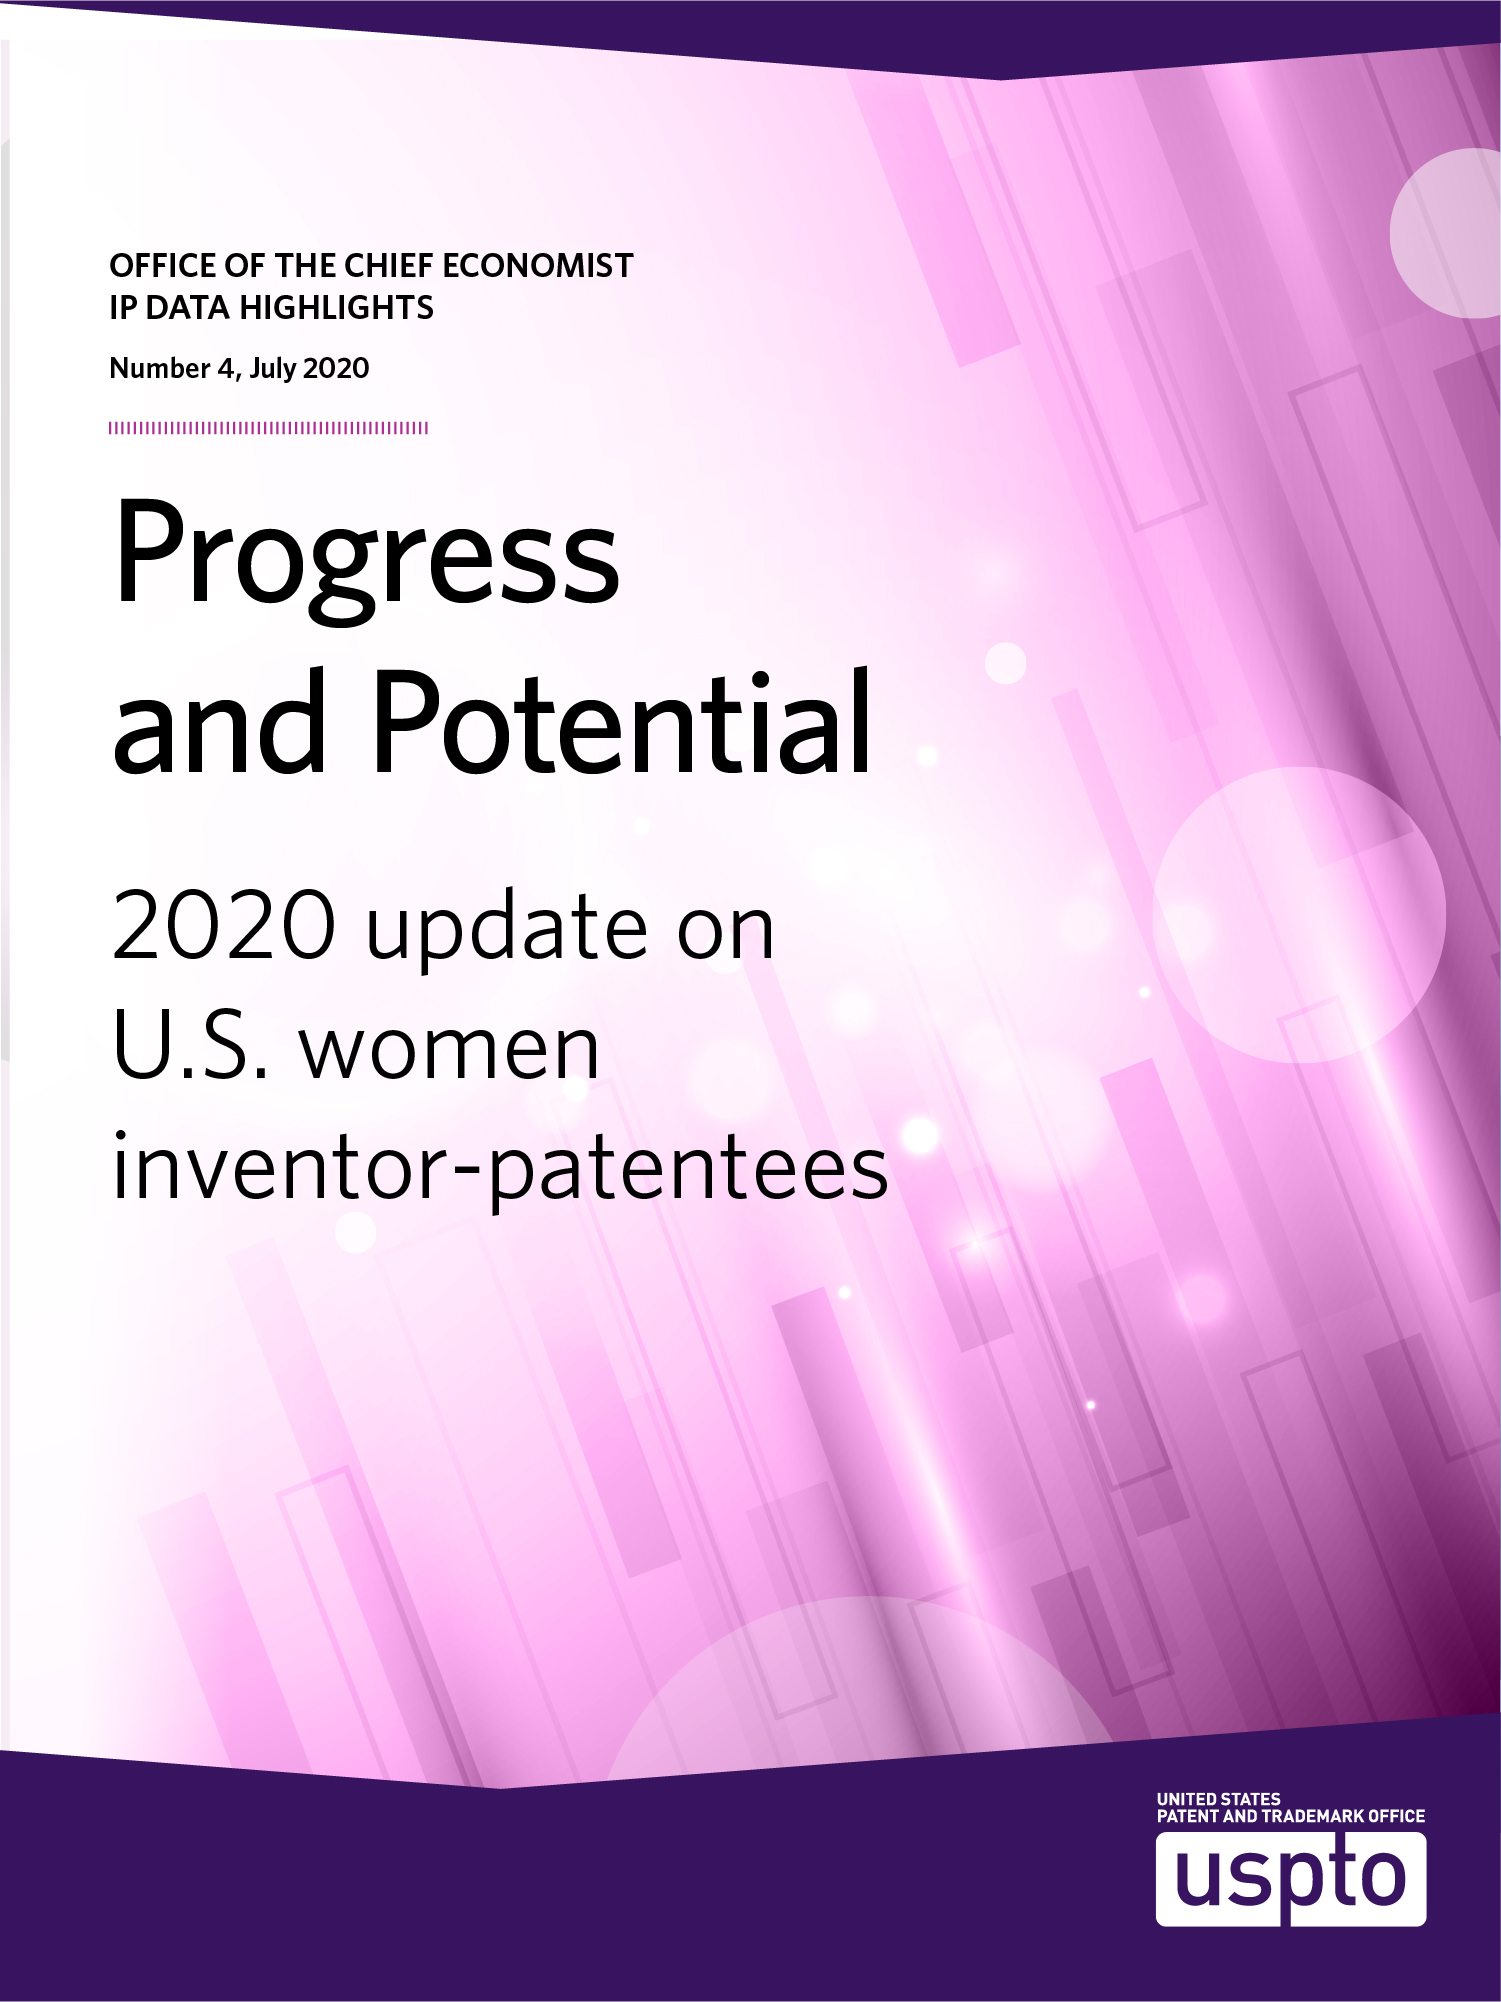 IP Data Highlight no. 4: Progress and Potential report, text on a purple background